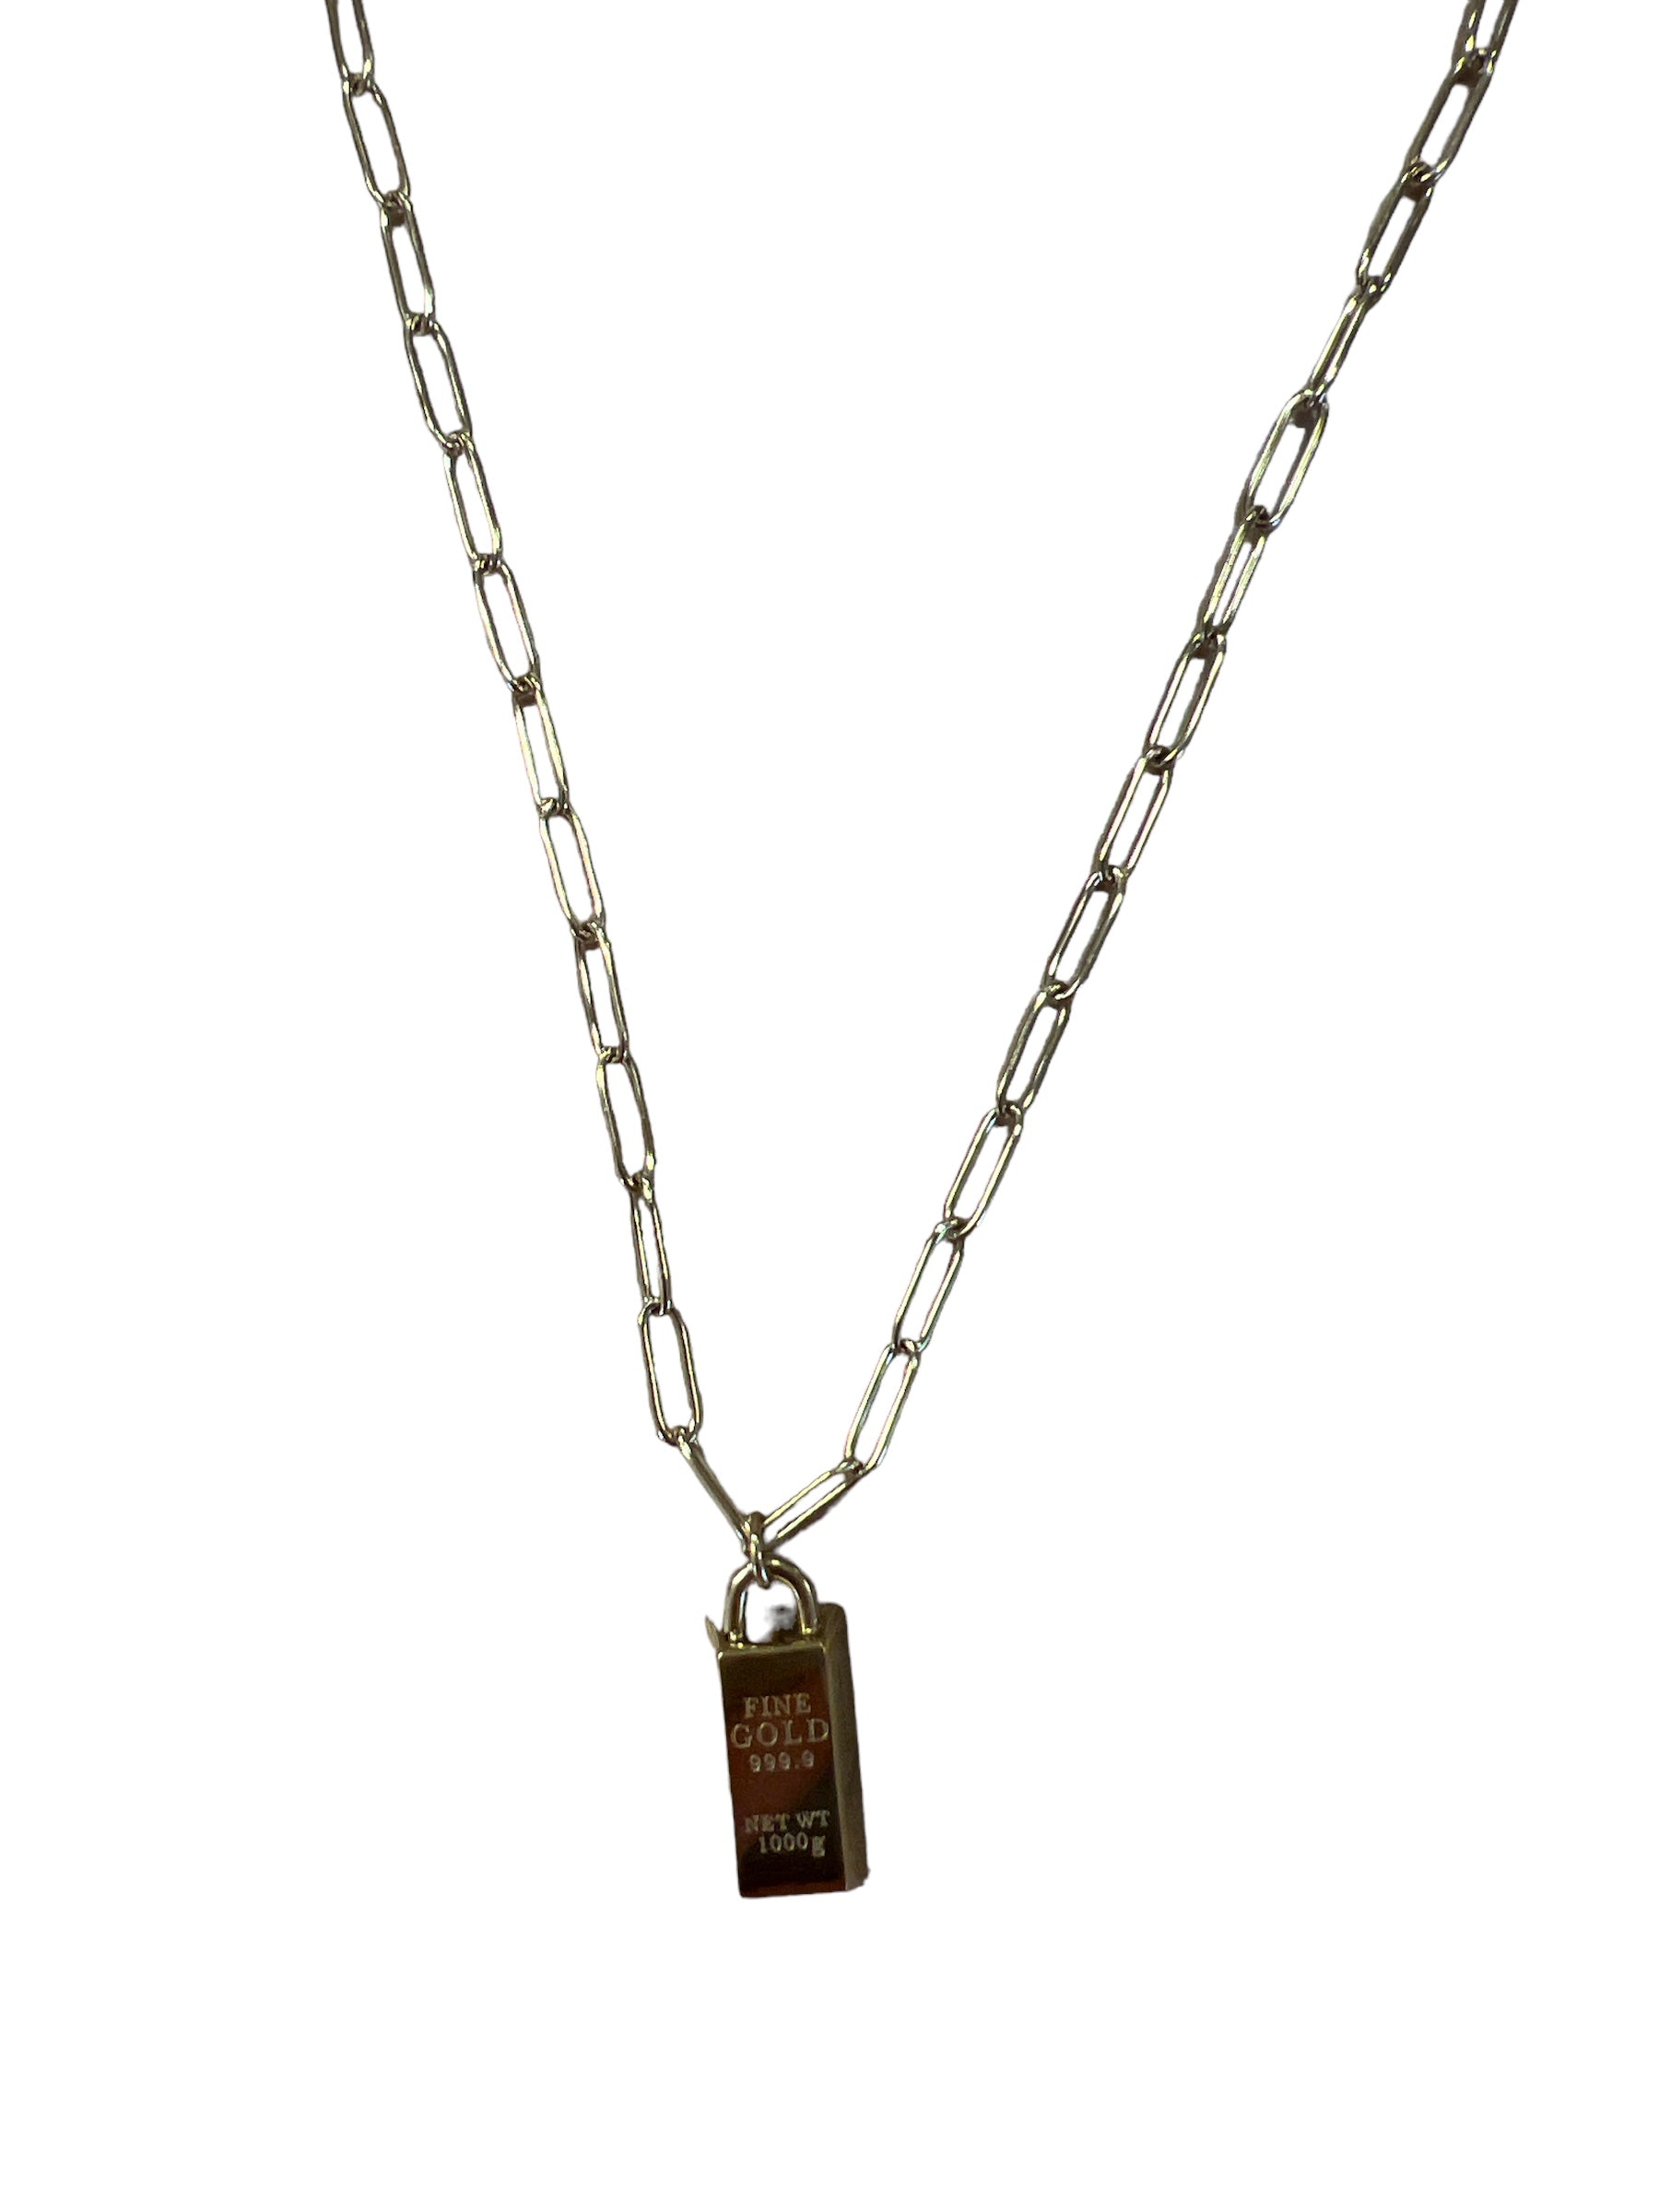 Gold Bar Necklace-410 Jewelry-Simply Stylish Boutique-Simply Stylish Boutique | Women’s & Kid’s Fashion | Paducah, KY